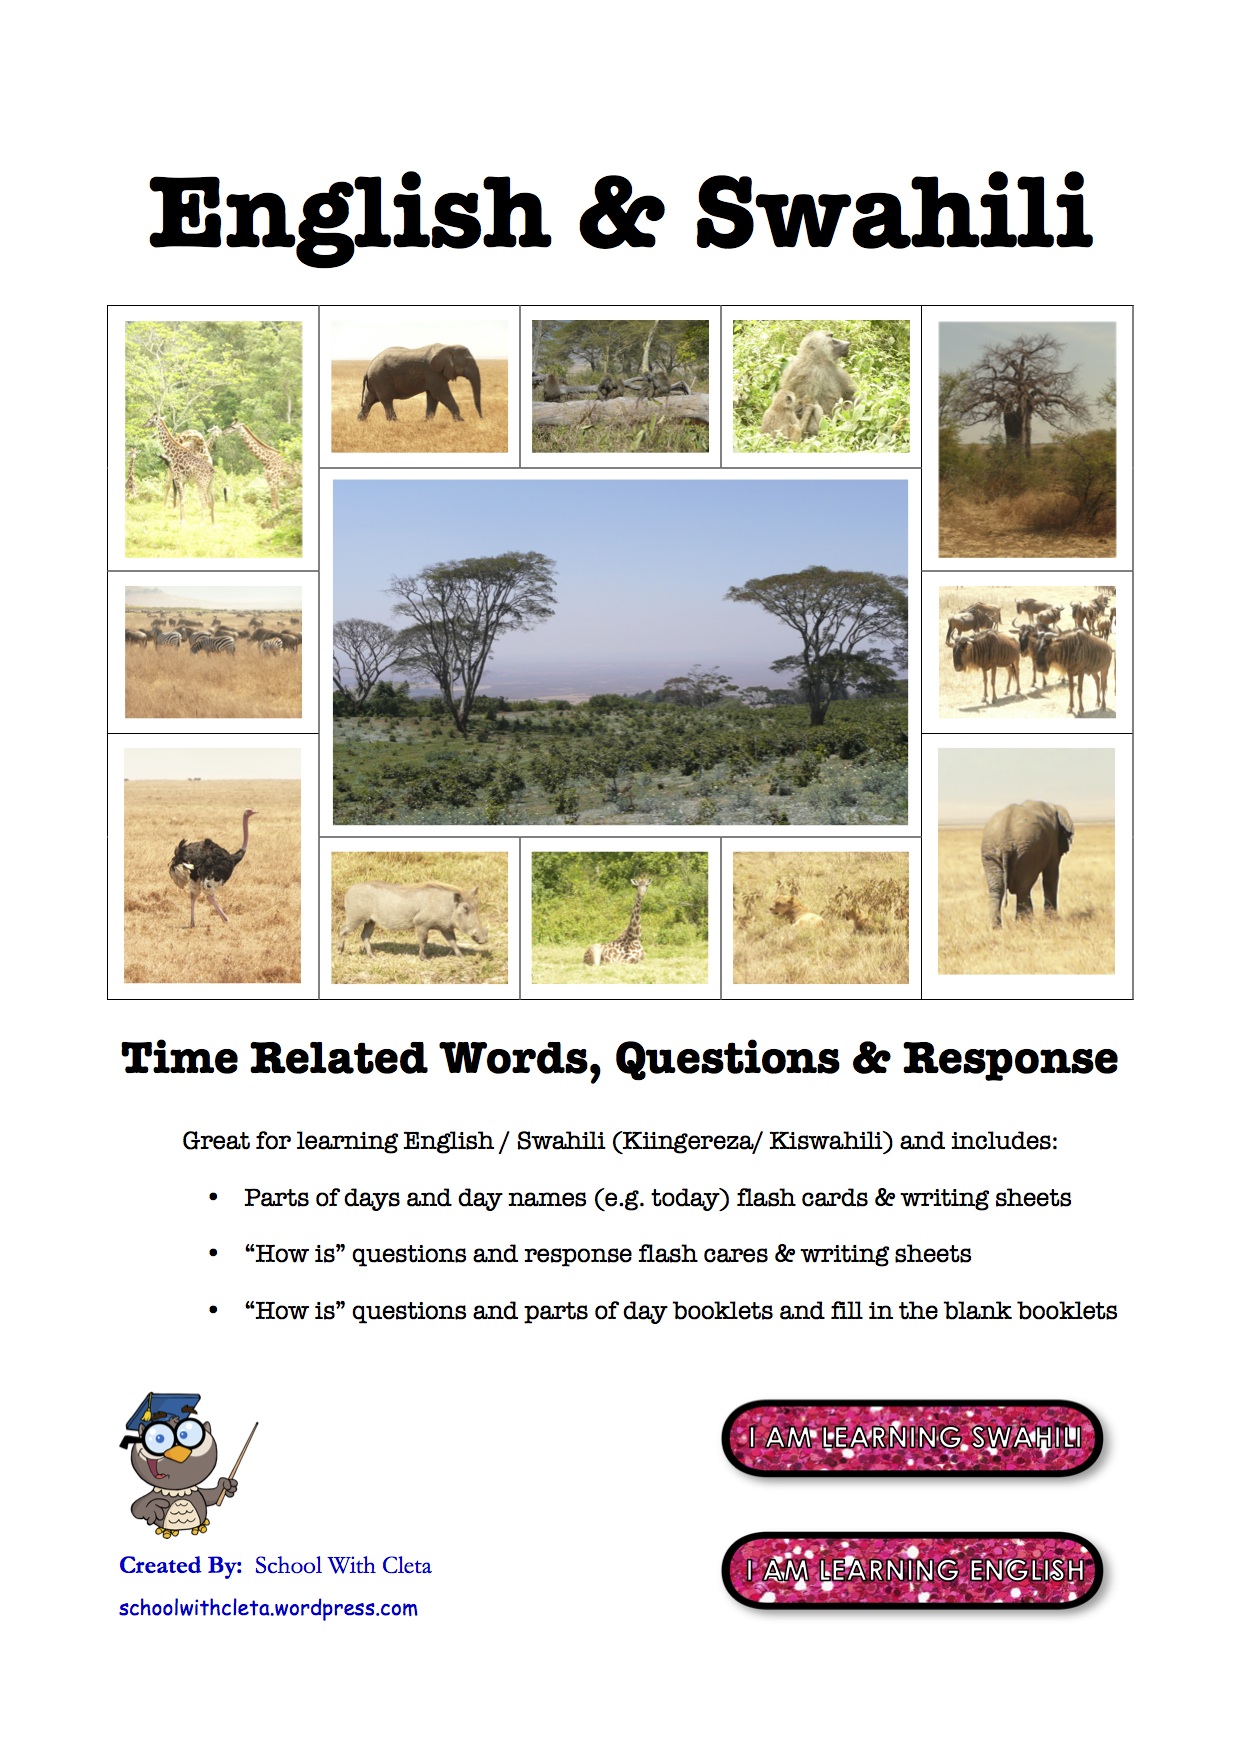 English / Swahili: Time Related Flash Cards / Practice Writing / Word Booklet